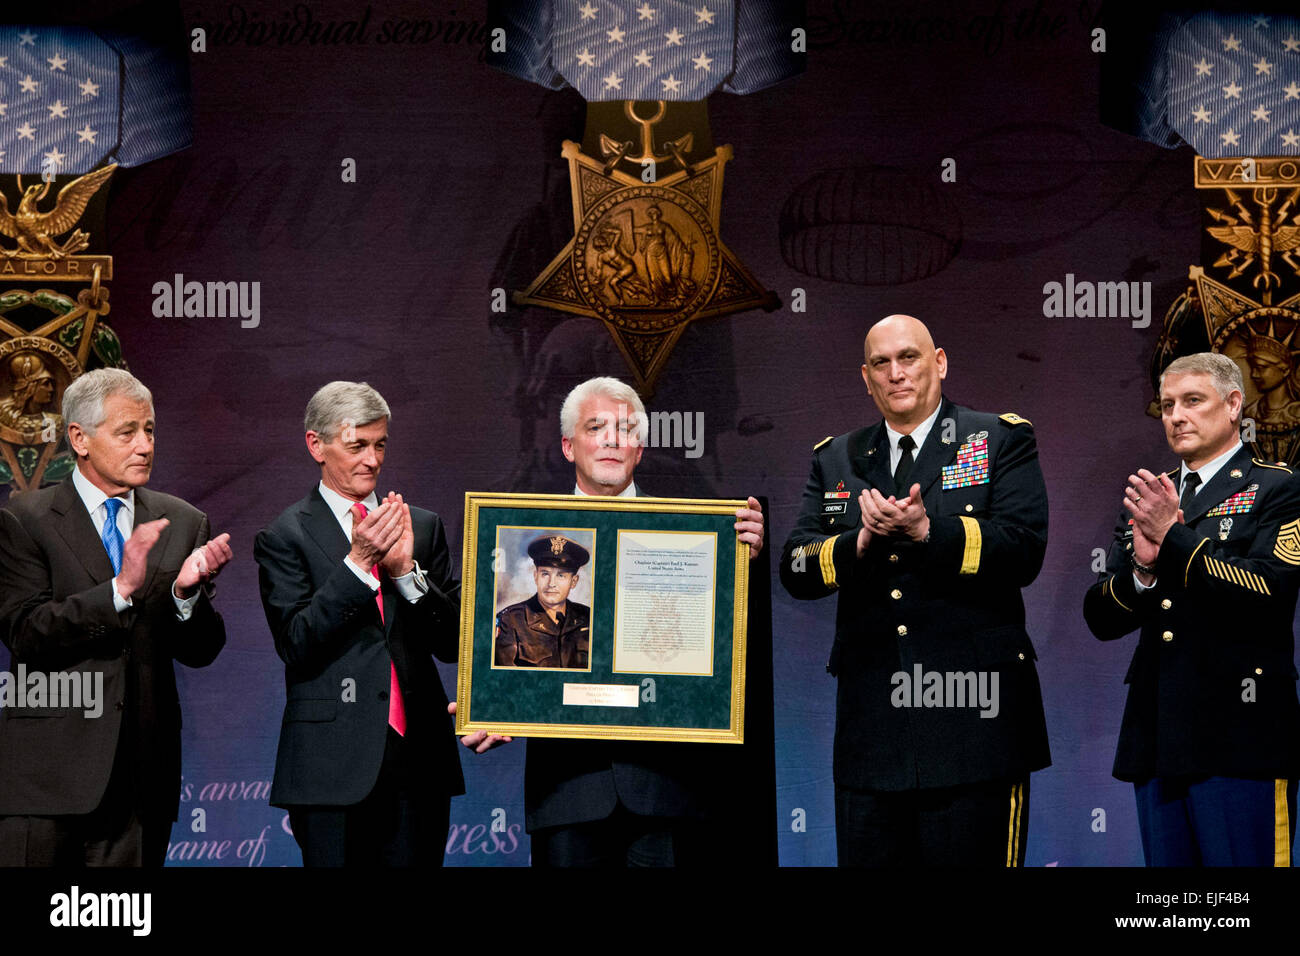 Defense Secretary Chuck Hagel, far left, applauds during a ceremony to induct Medal of Honor recipient Army Chaplain Capt. Emil Kapaun into the Hall of Heroes at the Pentagon, April 12, 2013. Ray Kapaun, the chaplain's nephew, represented his uncle, who served in the Korean War, during the ceremony. Army Secretary John M. McHugh, second from left, Army Chief of Staff Gen. Ray Odierno, second from right, and Sgt. Maj. of the Army Raymond F. Chandler III, far right, participated in the ceremony. DOD photo by Erin A. Kirk-Cuomo Stock Photo